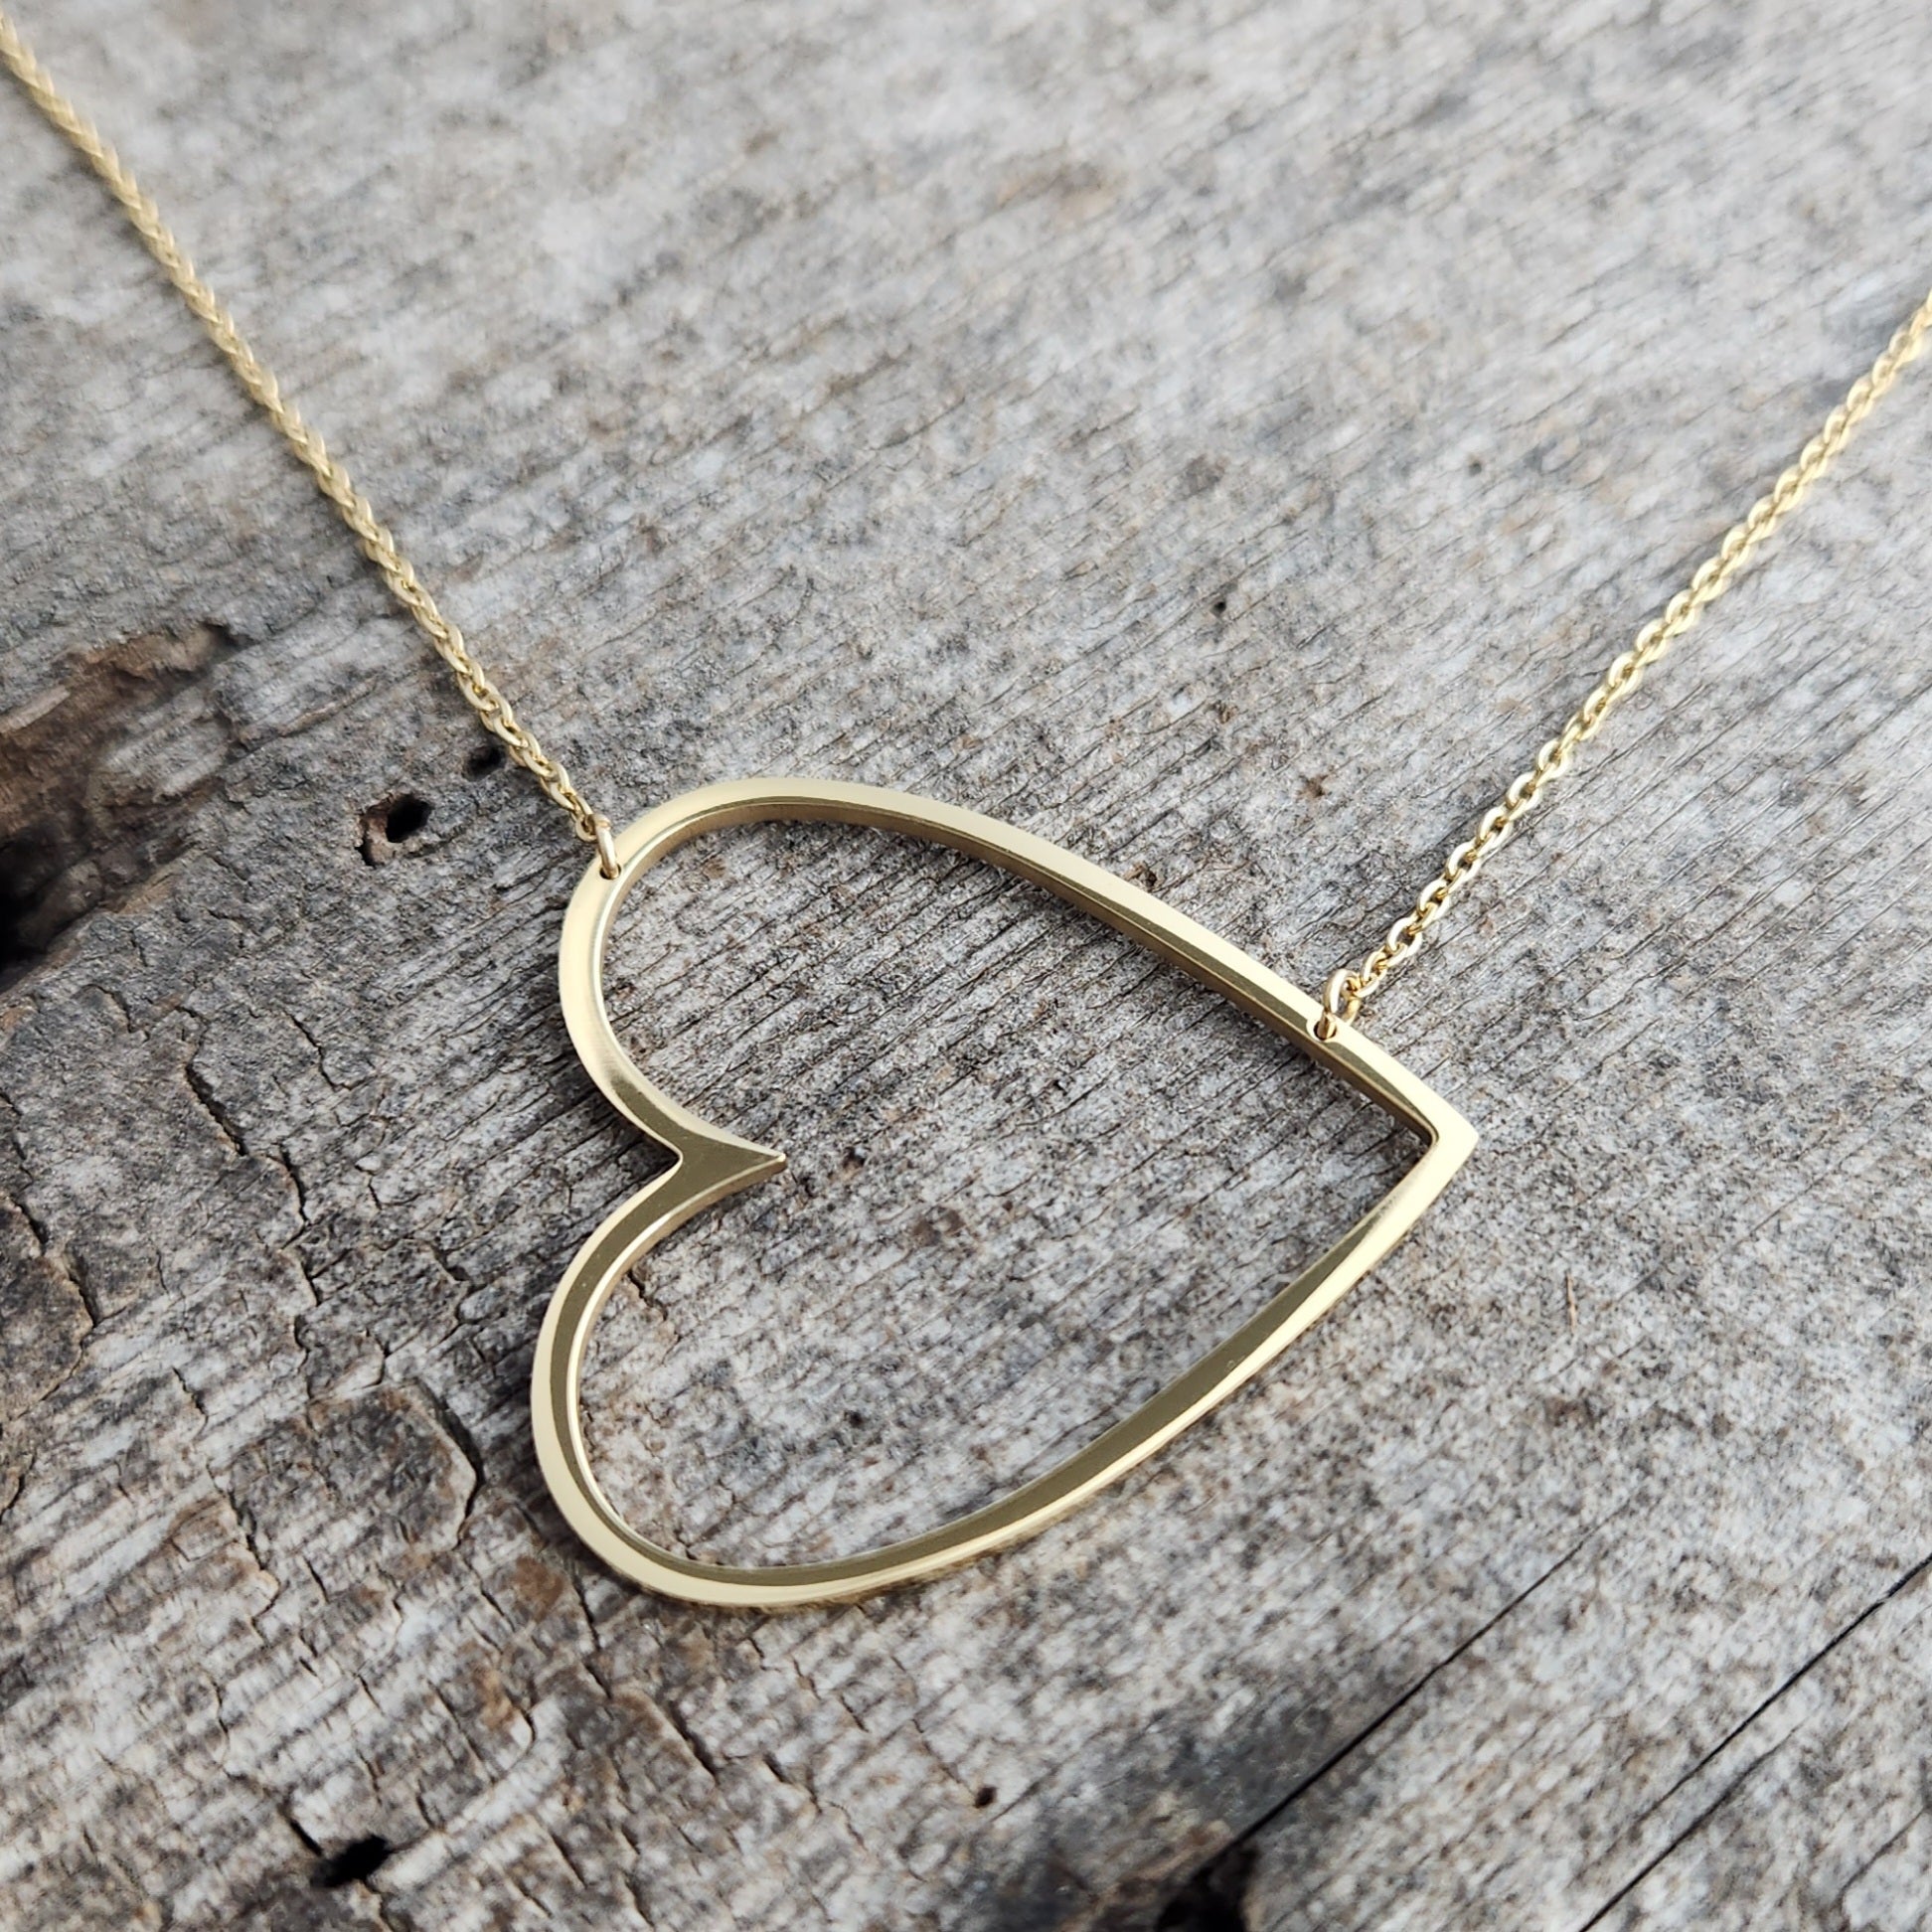 Cardia Necklace | Heart shaped pendant necklace, Necklace, Silver necklaces